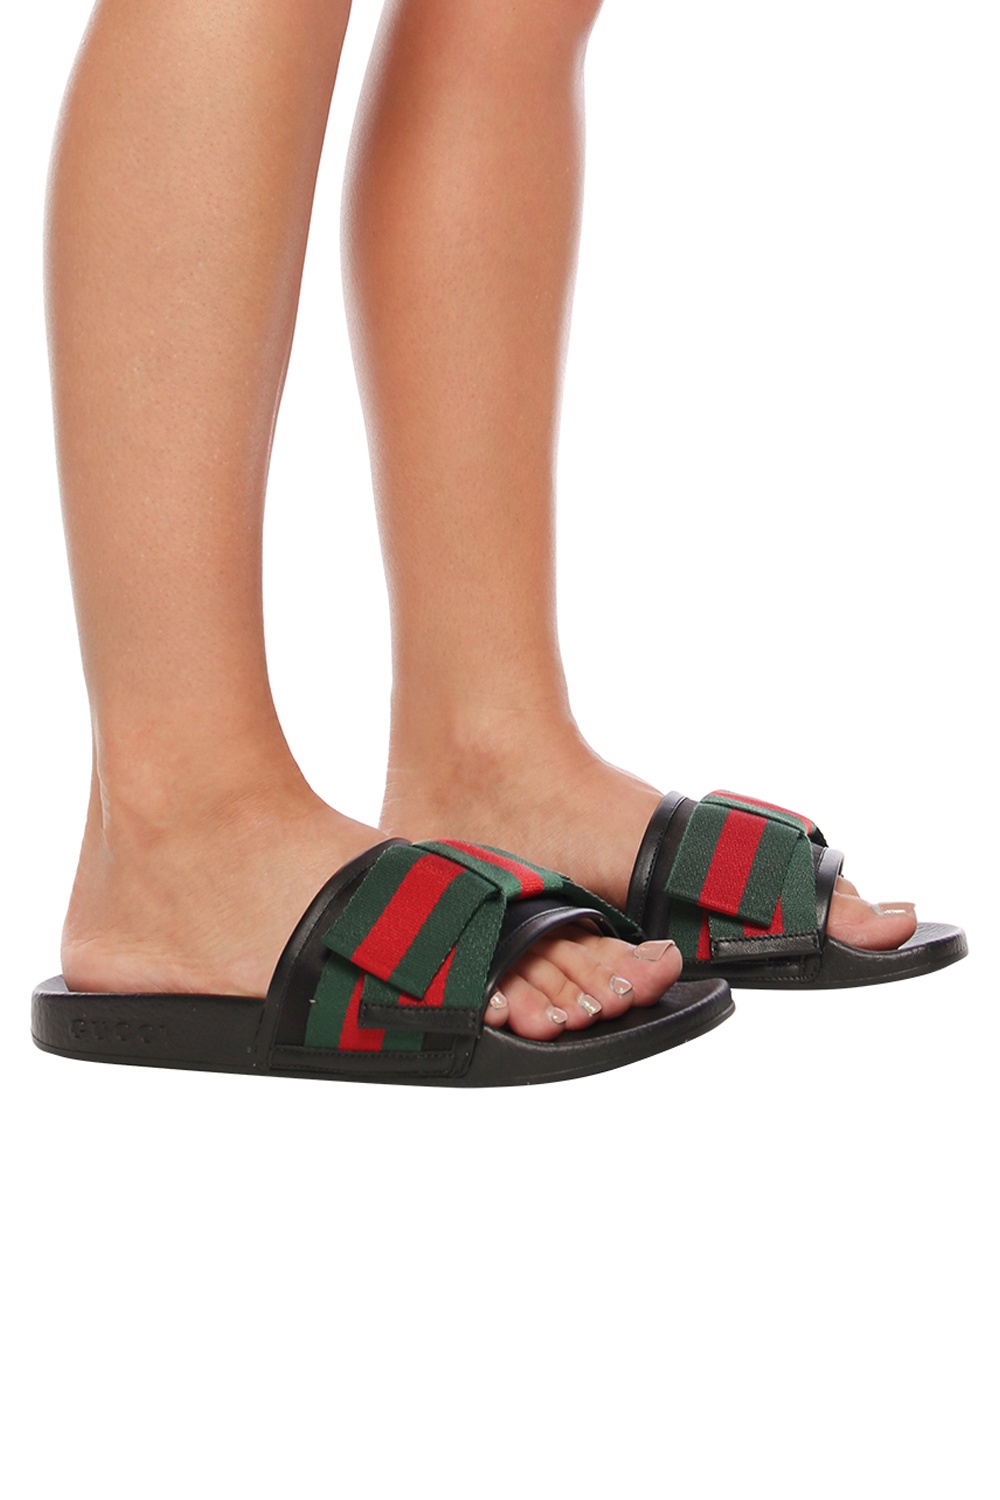 real gucci sliders